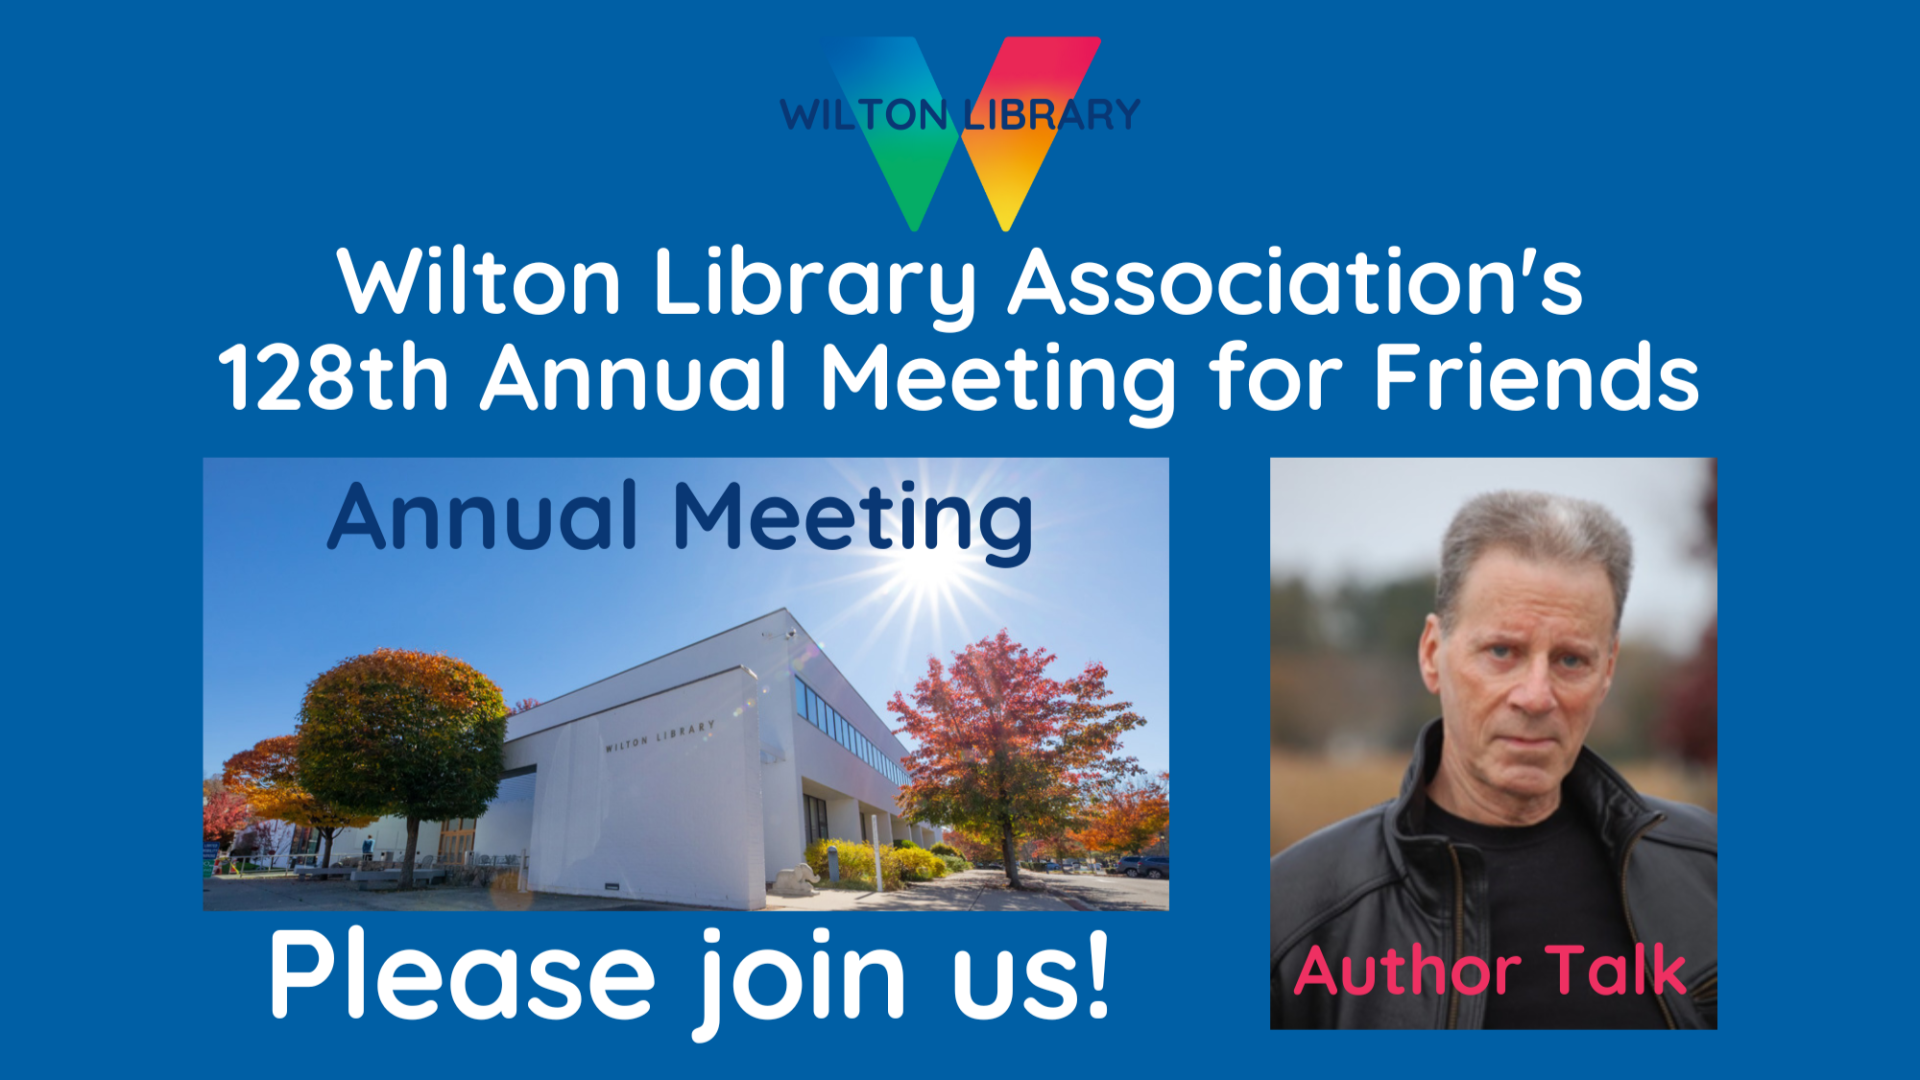 Wilton Library’s 128th Annual Meeting and Author Talk by Mark Rubinstein